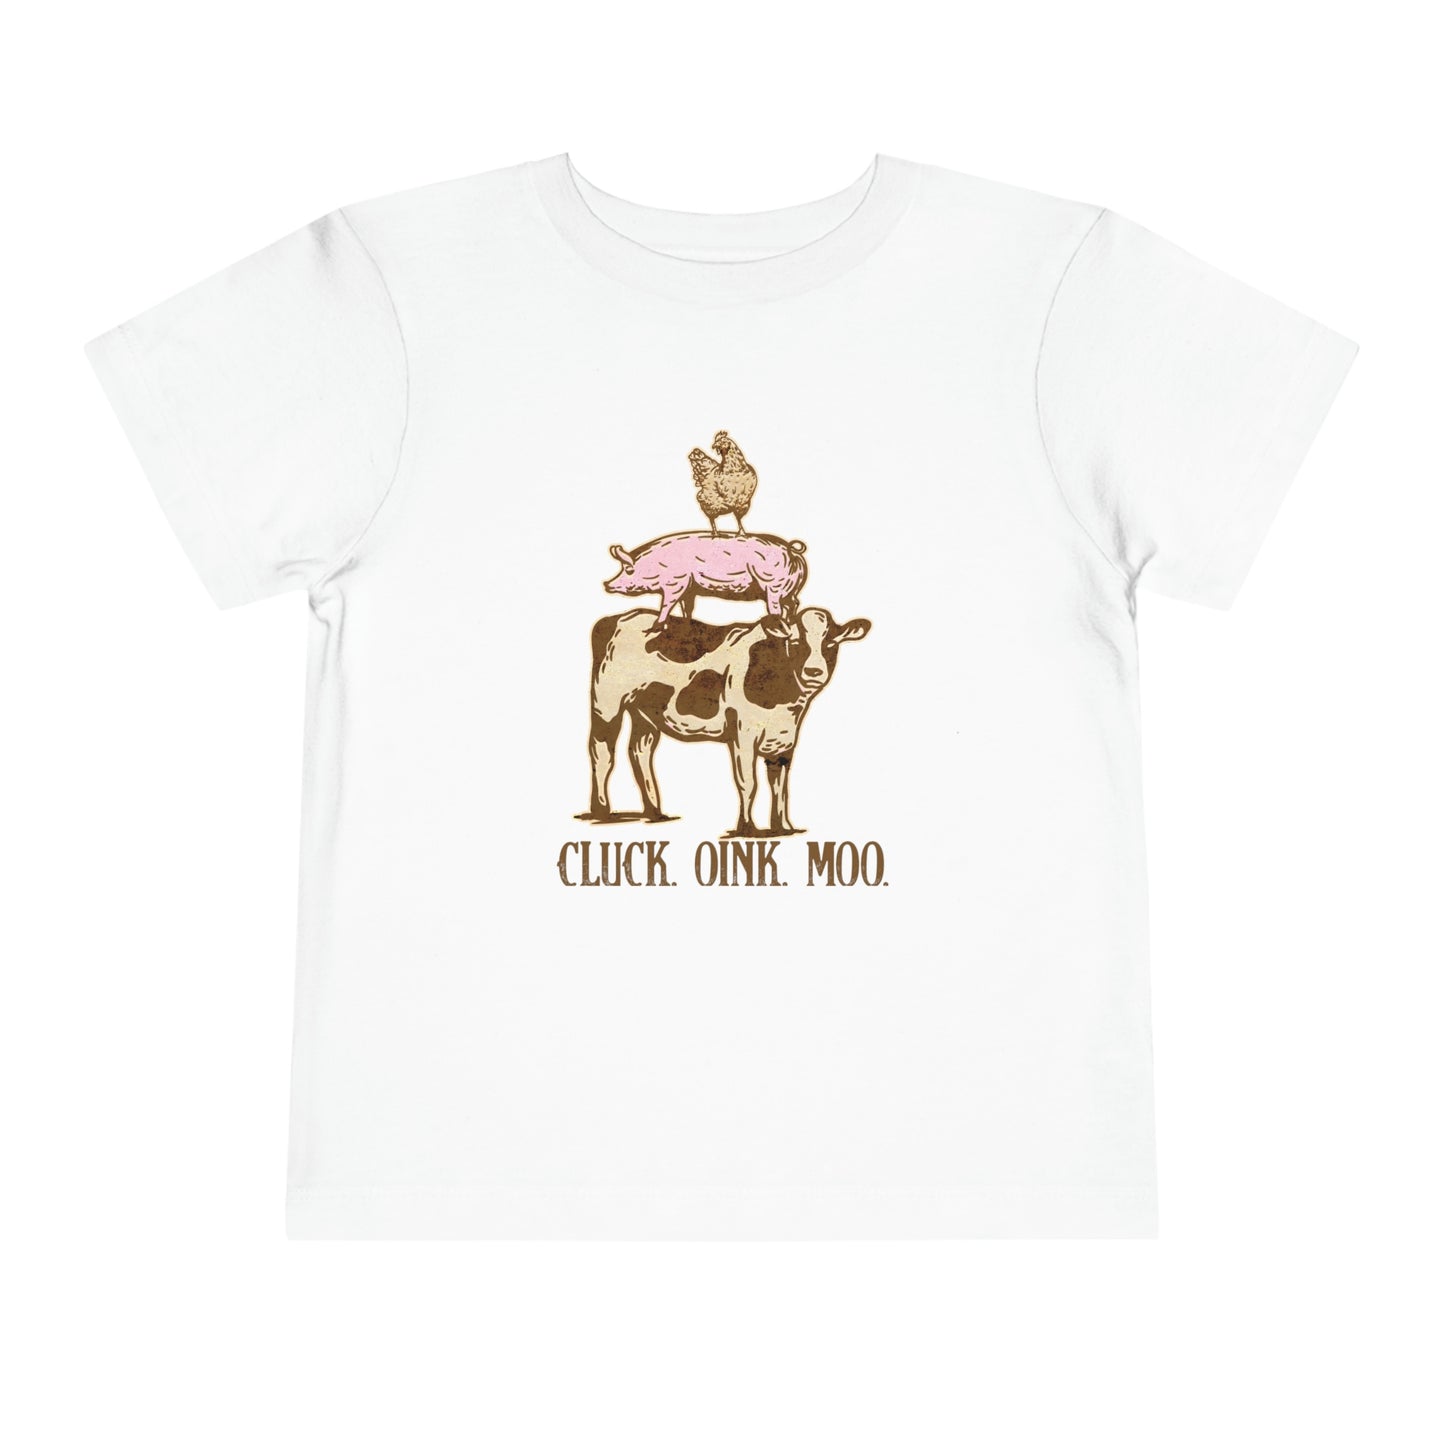 "Cluck, Oink, Moo" Toddler Short Sleeve Tee (2T-5T)